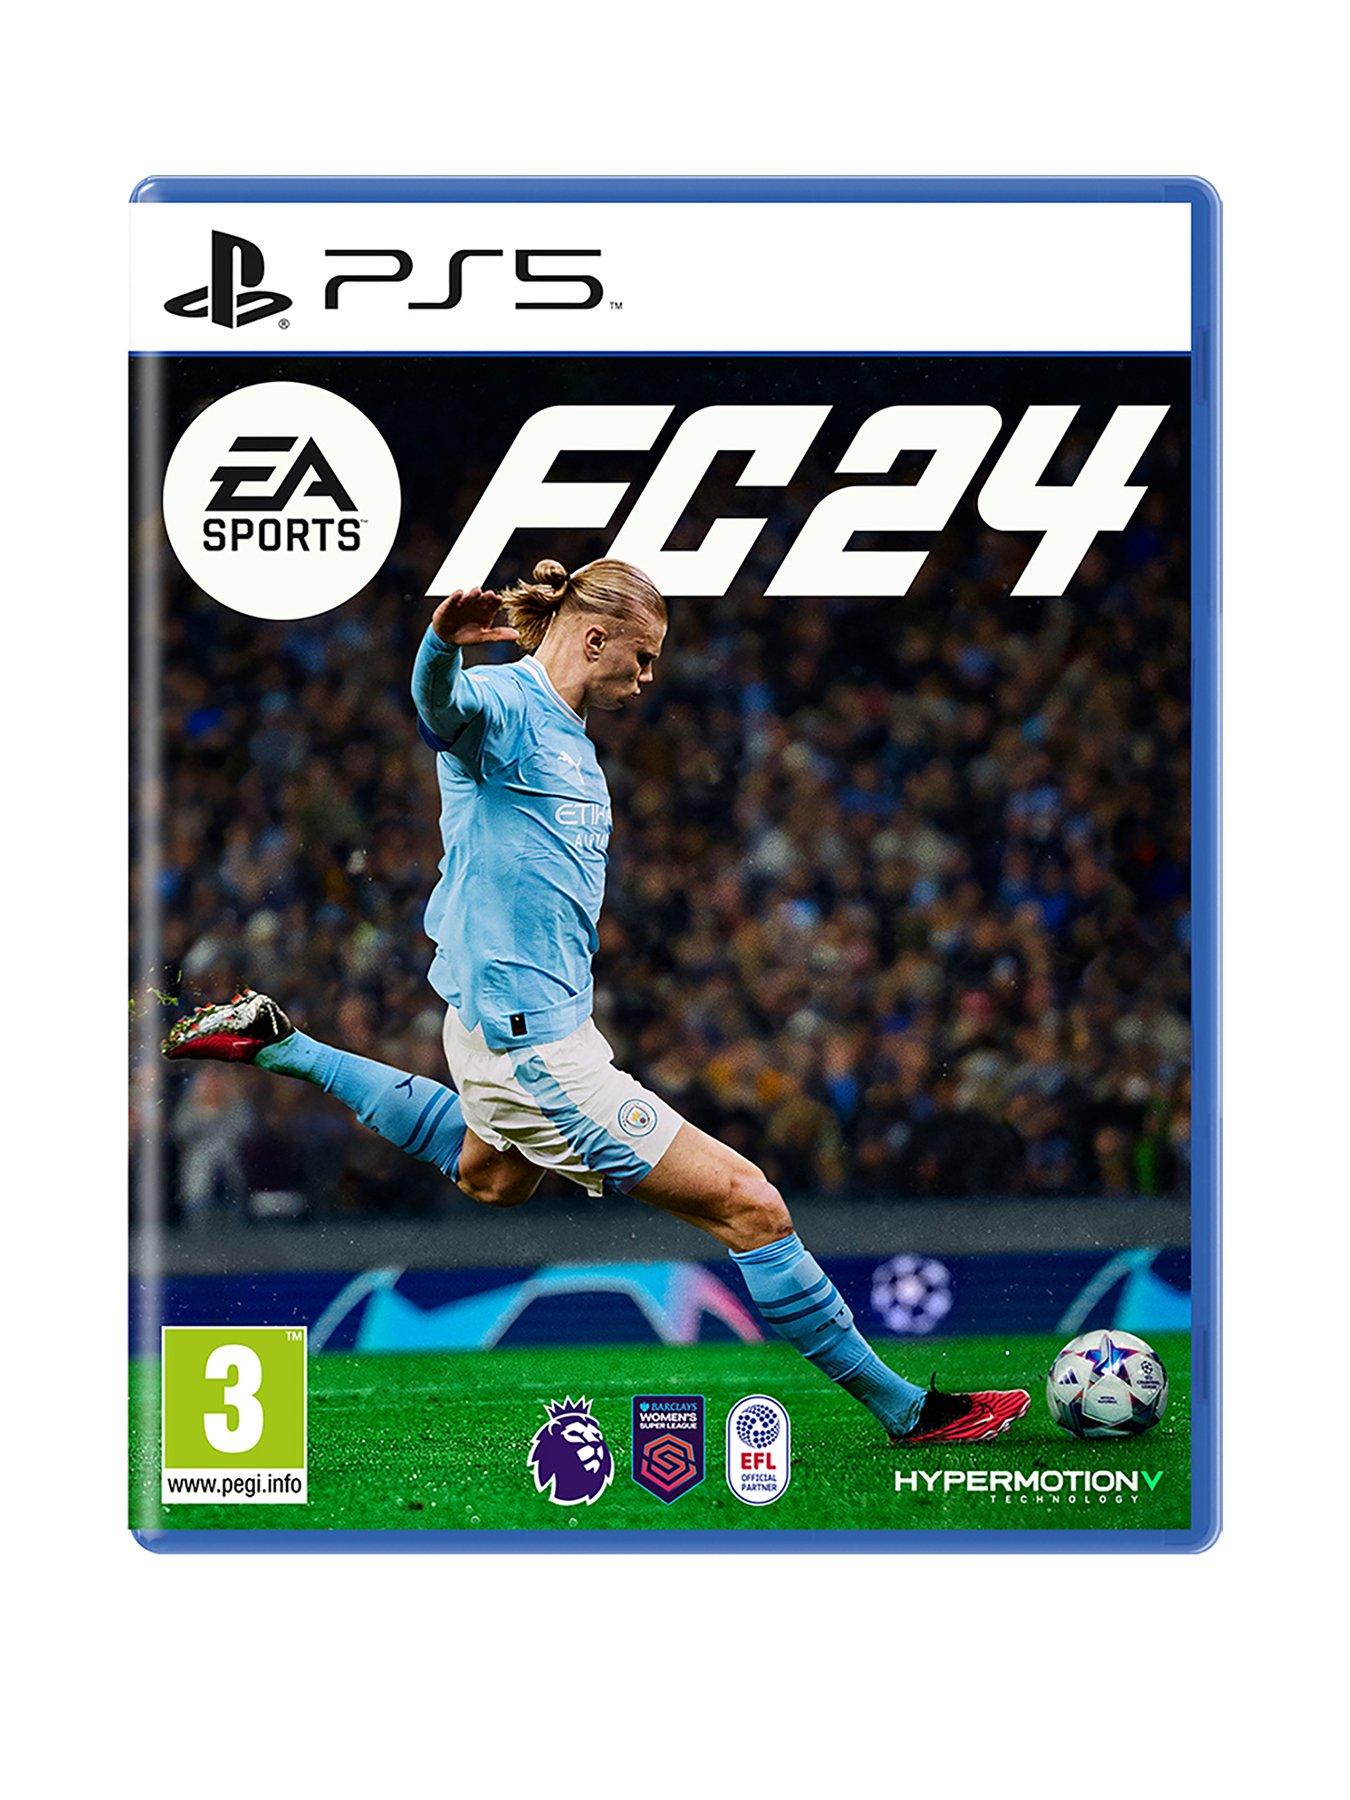 Buy FIFA 21 Standard Edition (Free PS5 Upgrade)+Detroit: Become